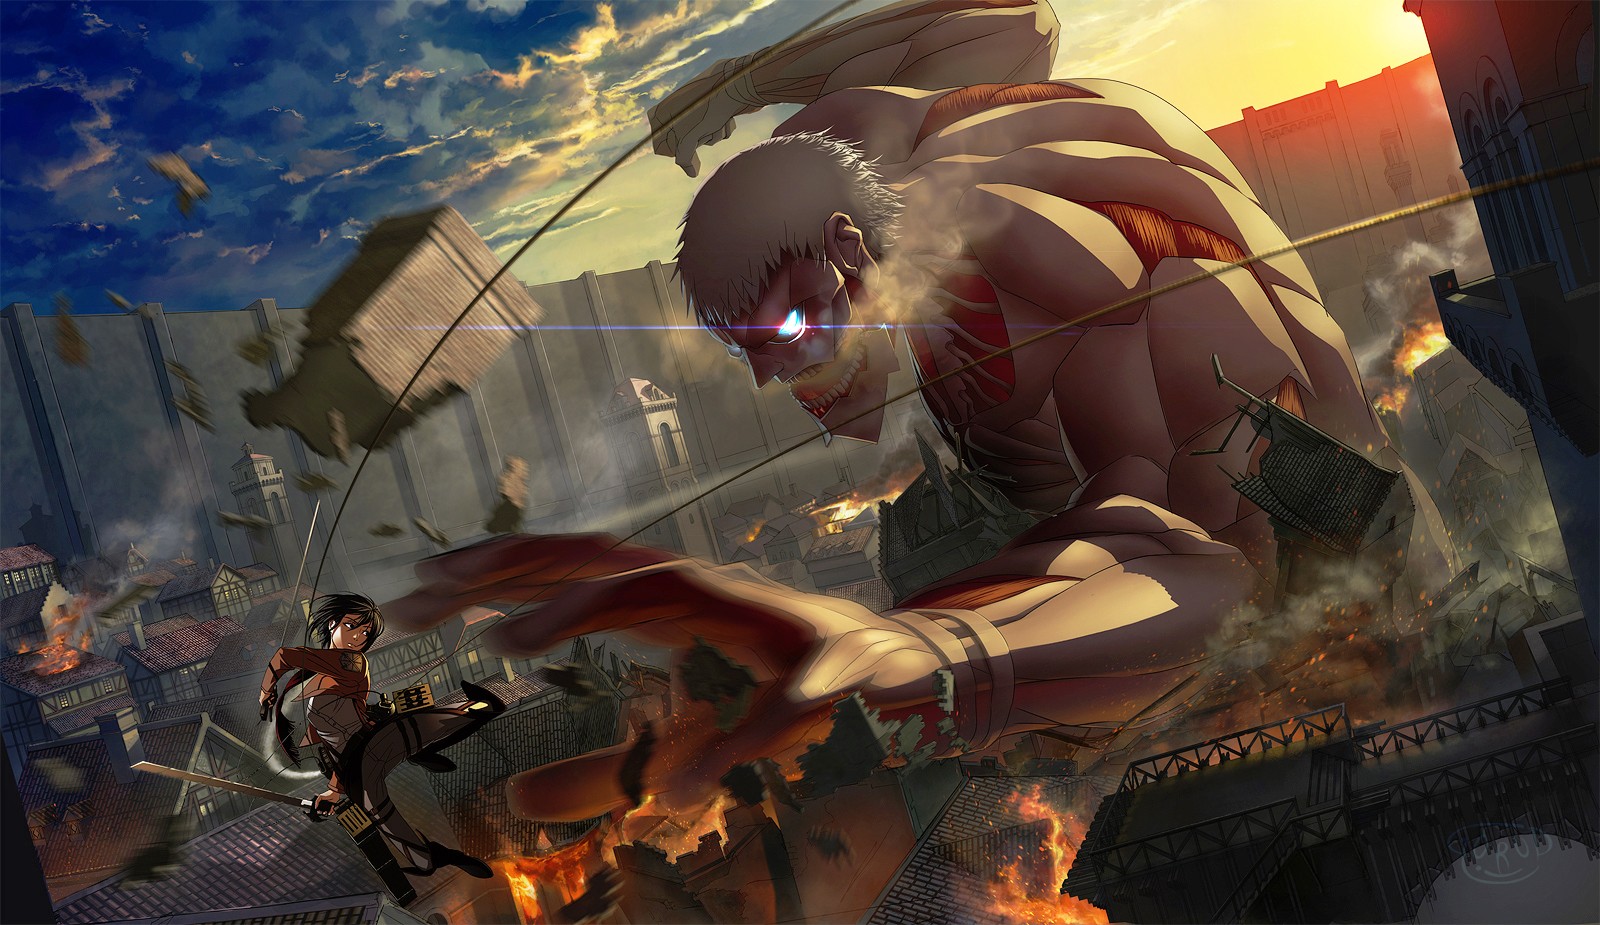 attack on titan wallpaper,action adventure game,cg artwork,pc game,illustration,fictional character